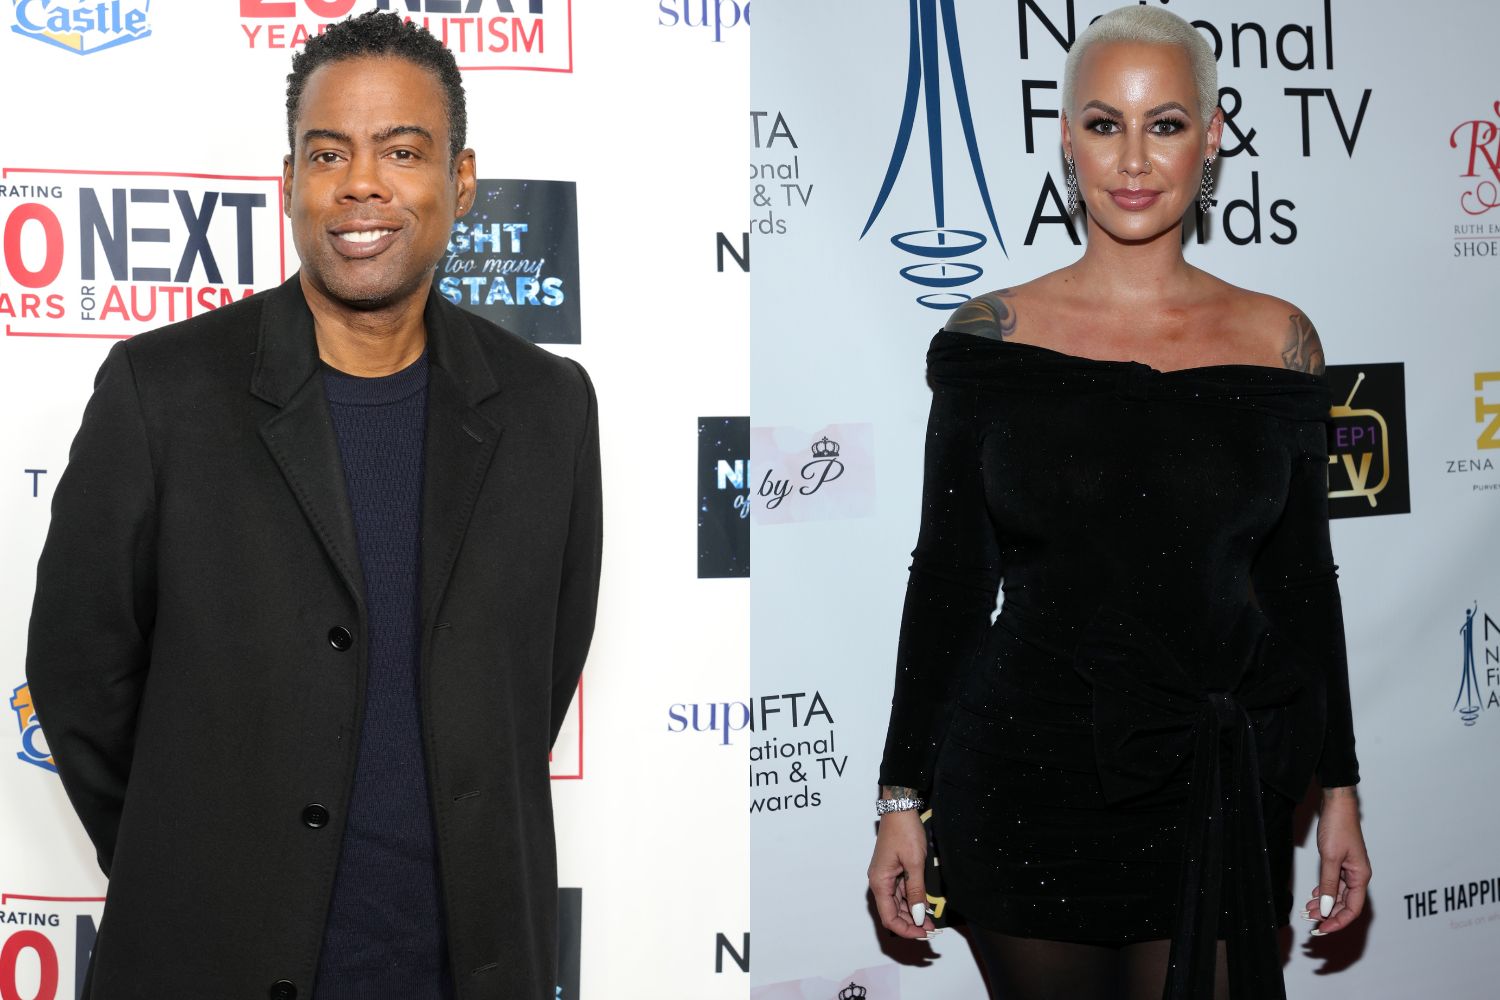 Period! Amber Rose Clarifies Alleged Romantic Relationship With Chris Rock (Video)